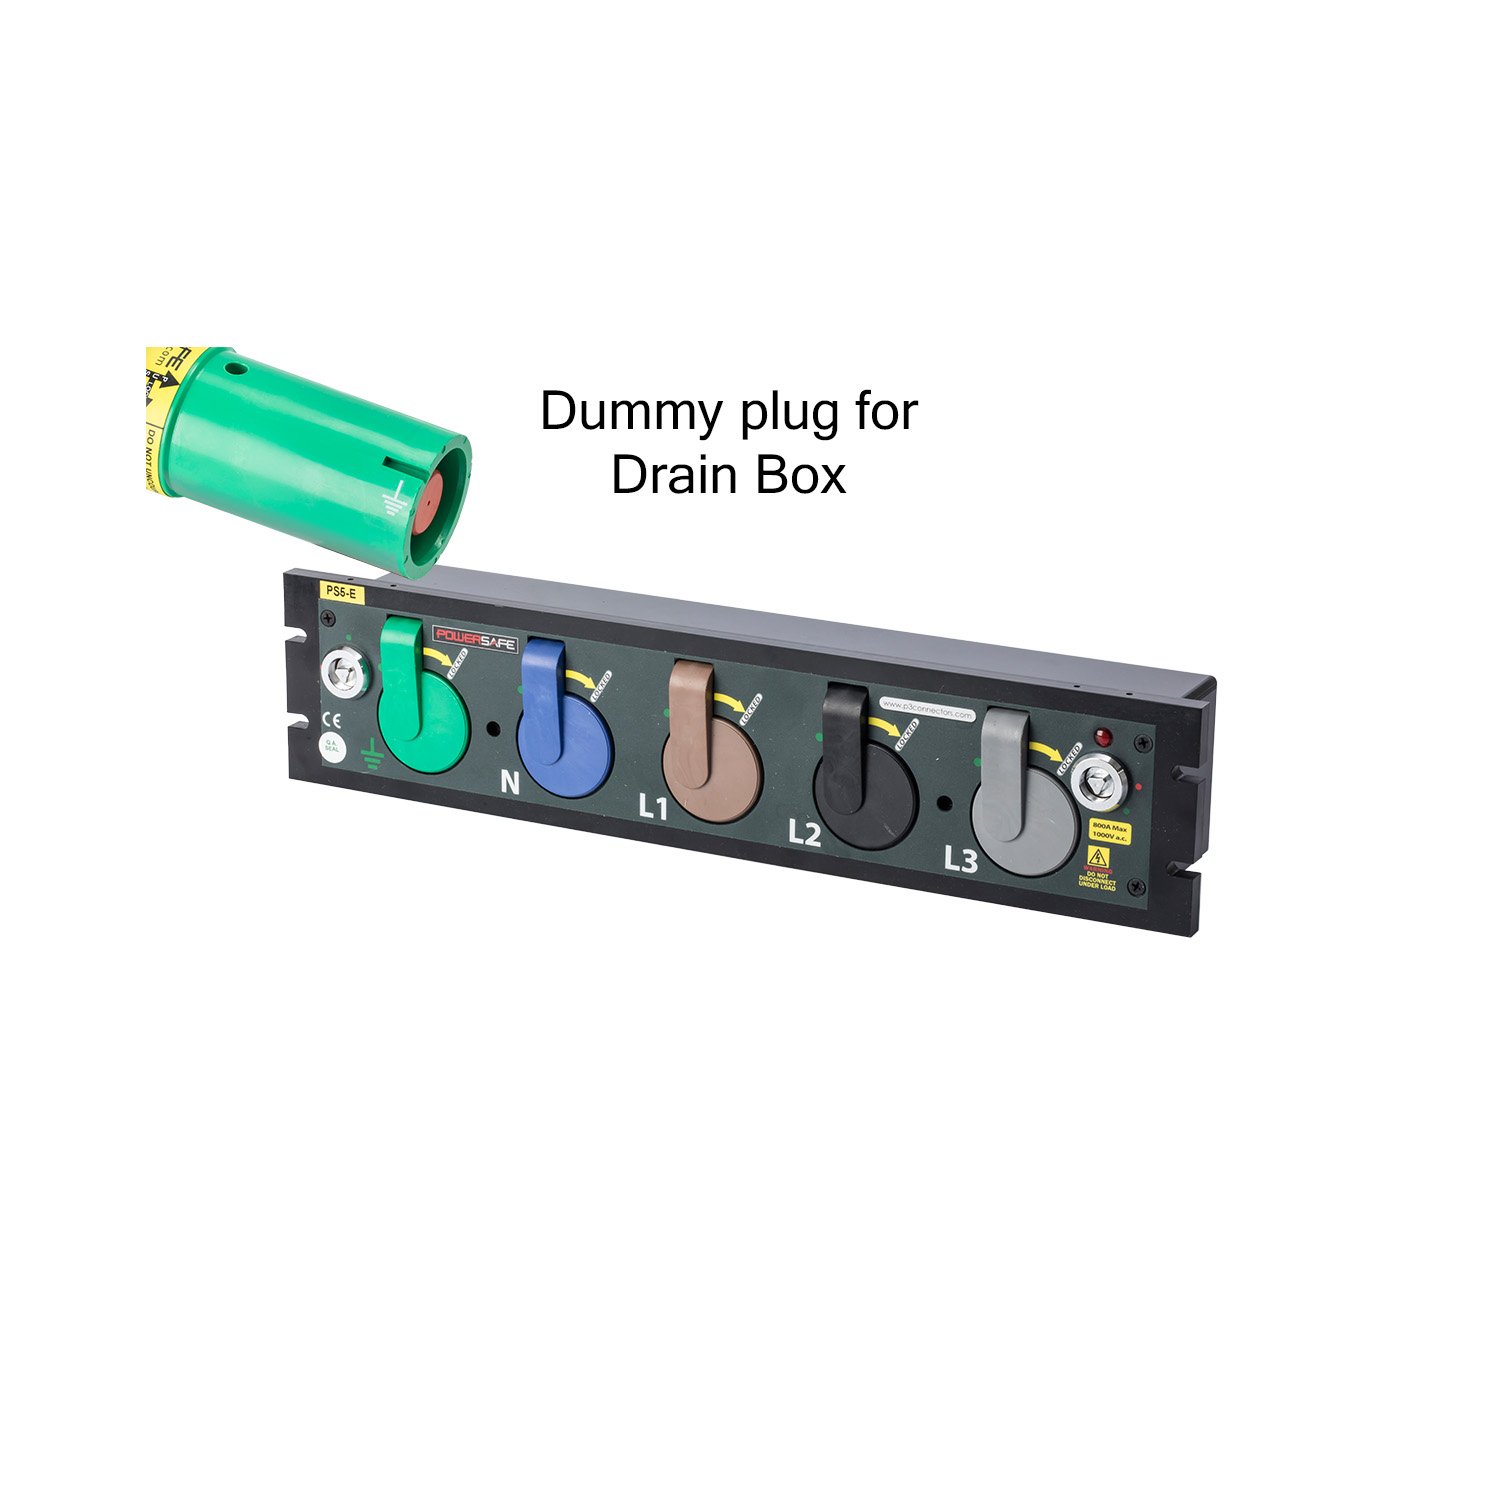 126325 P3 DRAIN BOX Dummy PLUG E-GN to use Sequential box without Earth lead